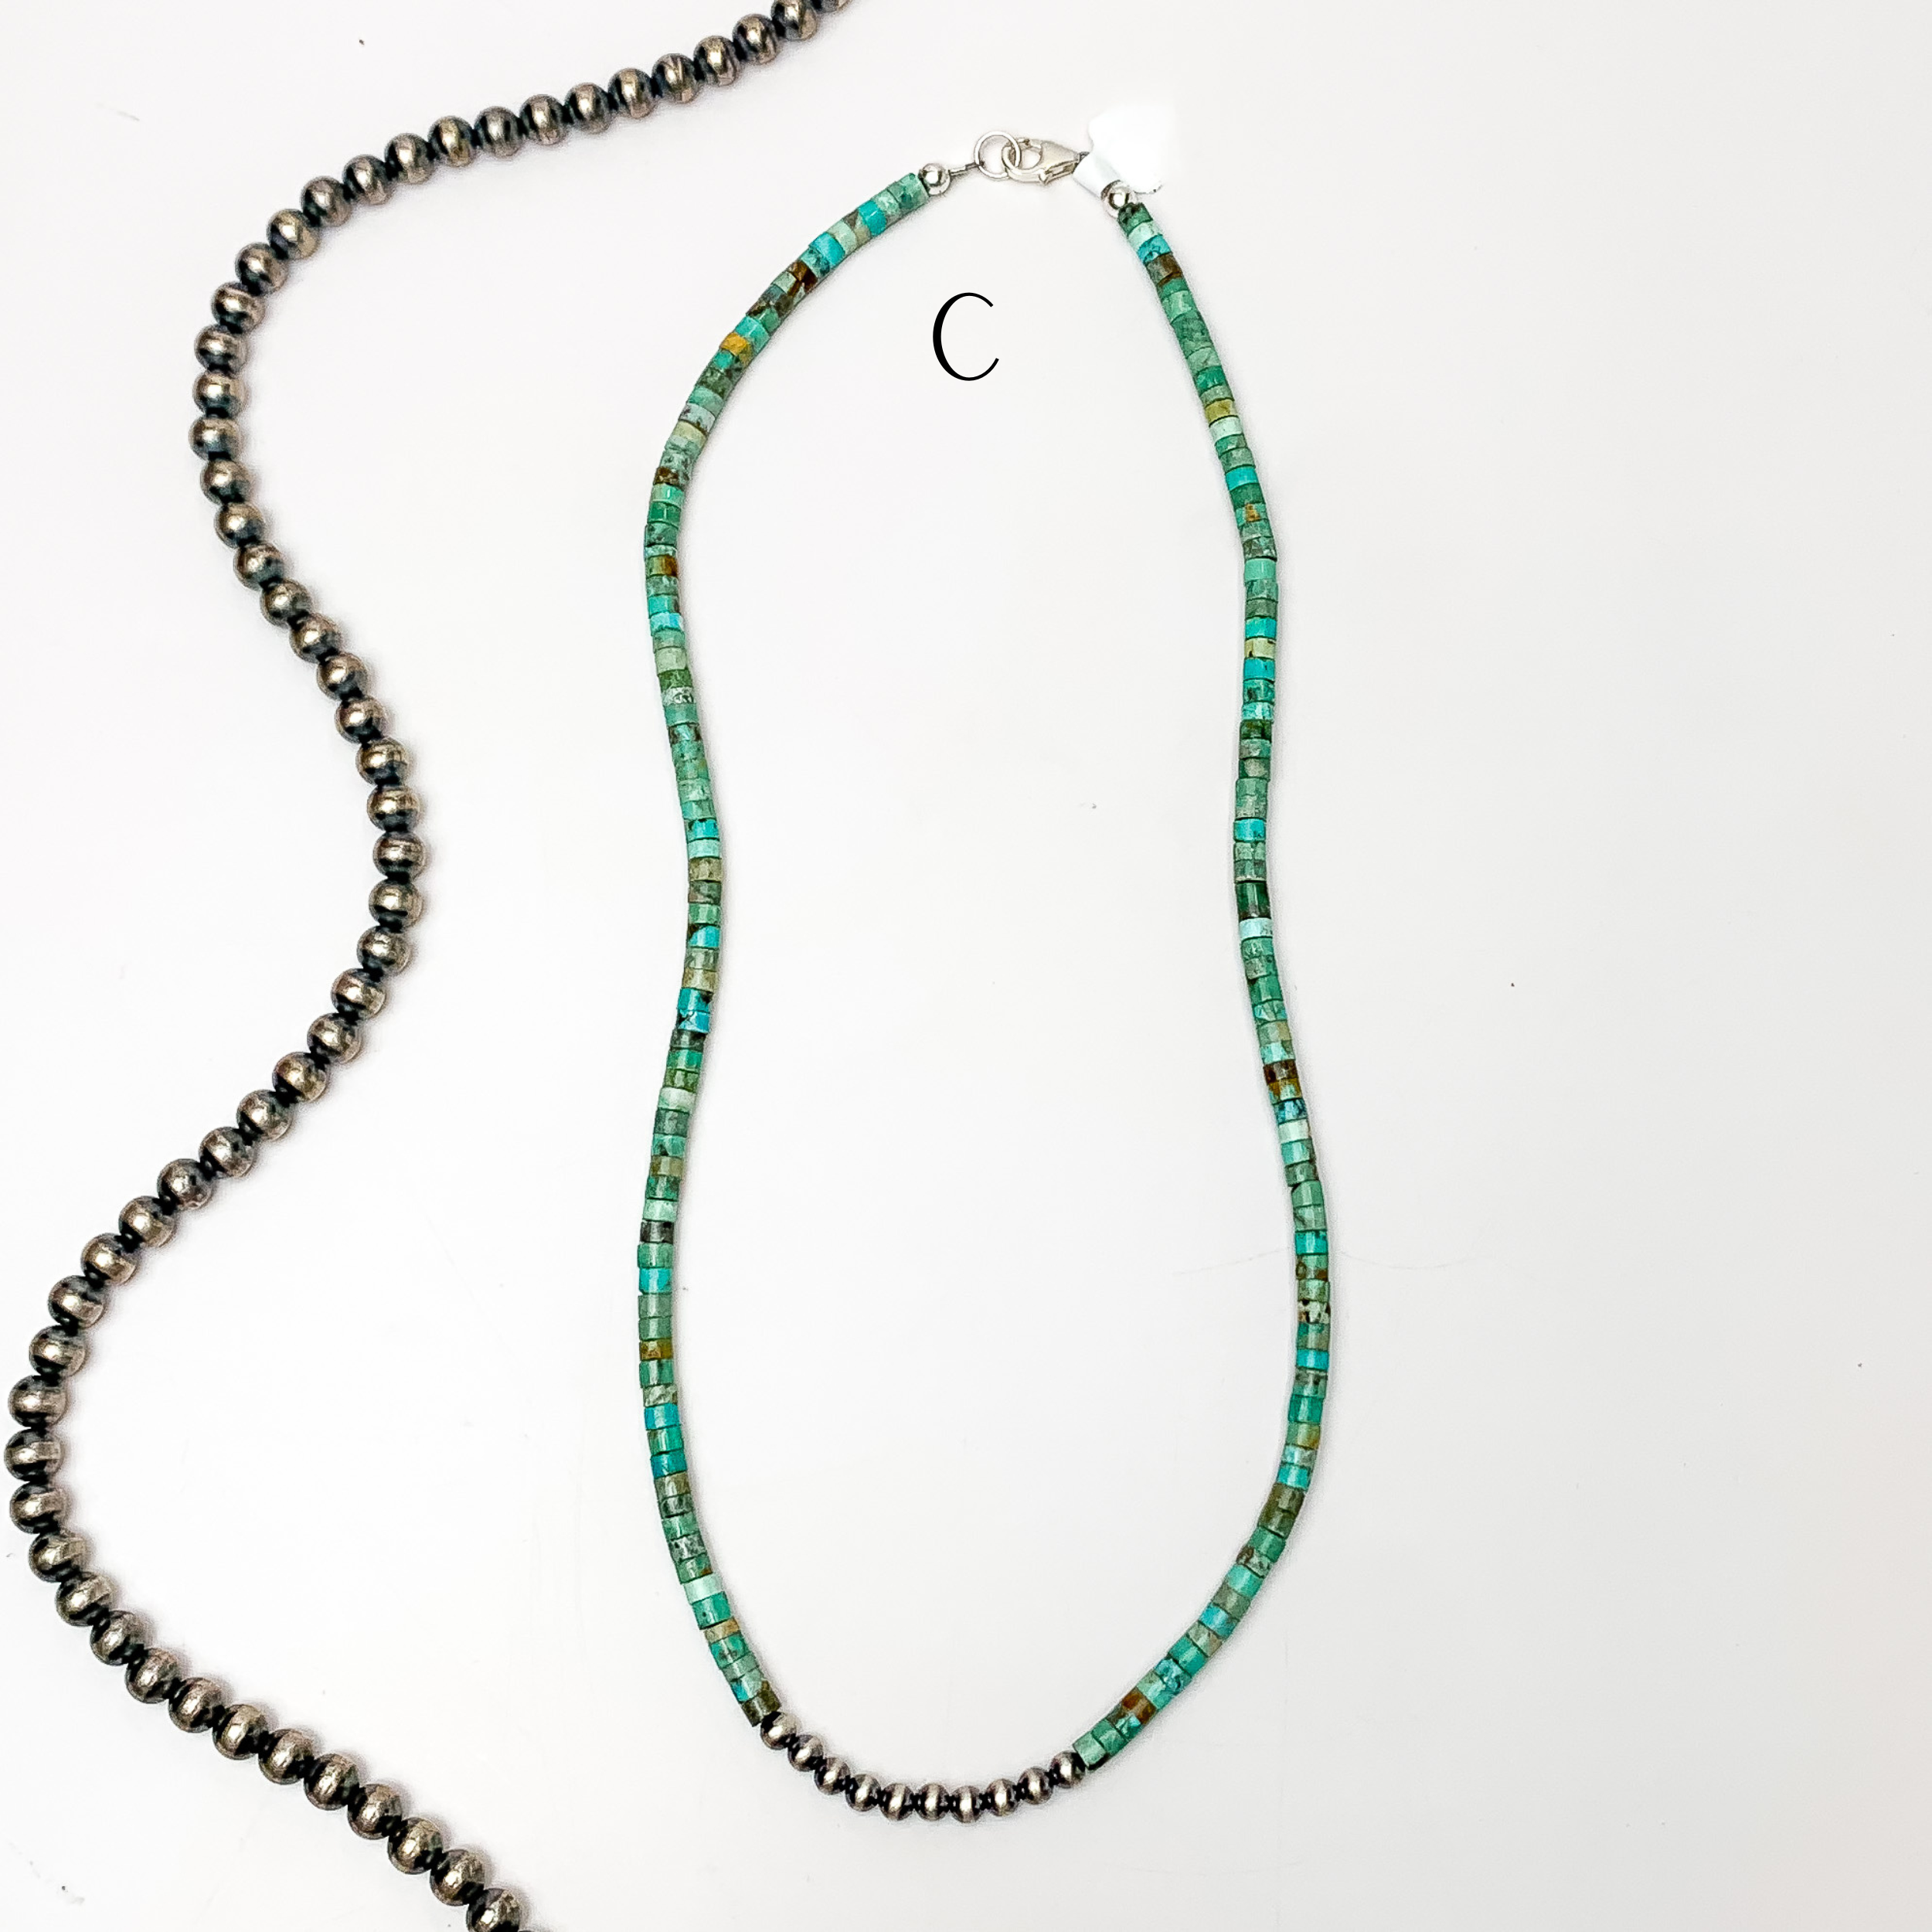 Corraine Smith | Navajo Handmade Heishi Beaded Necklace with Navajo Pearls in Kingman Turquoise - Giddy Up Glamour Boutique